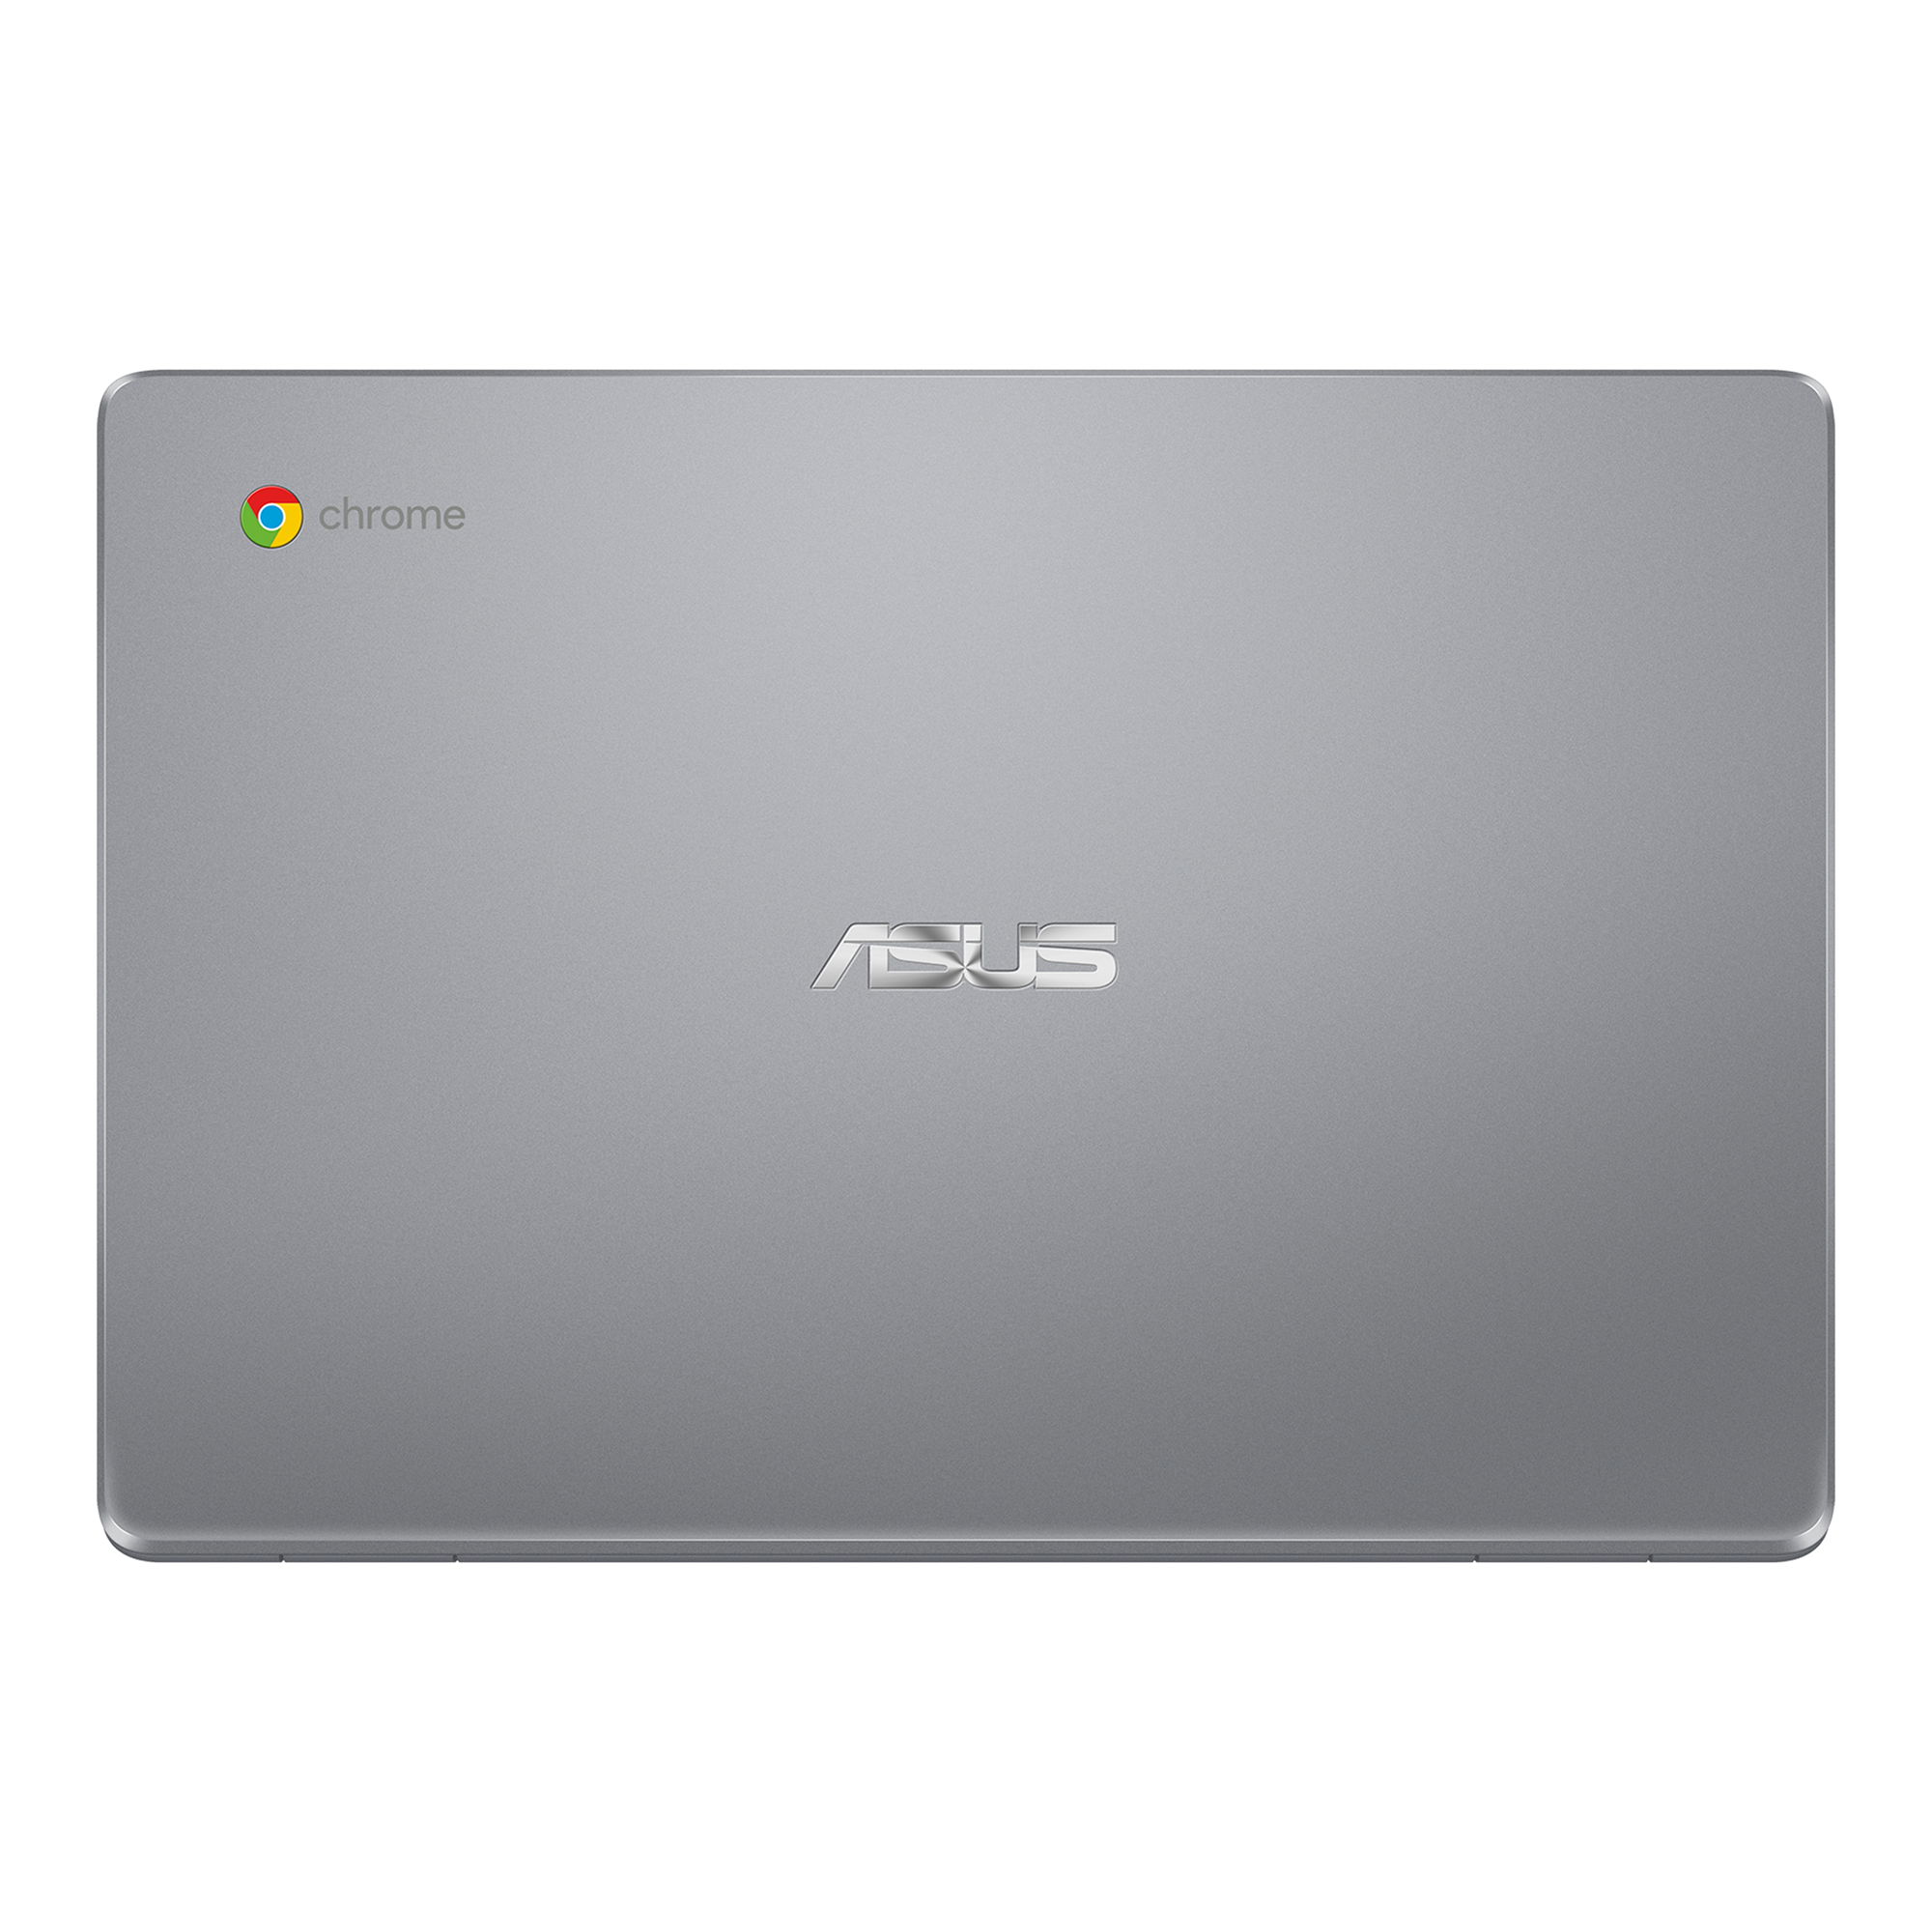 ASUS Chromebook C223｜Laptops For Home｜ASUS USA